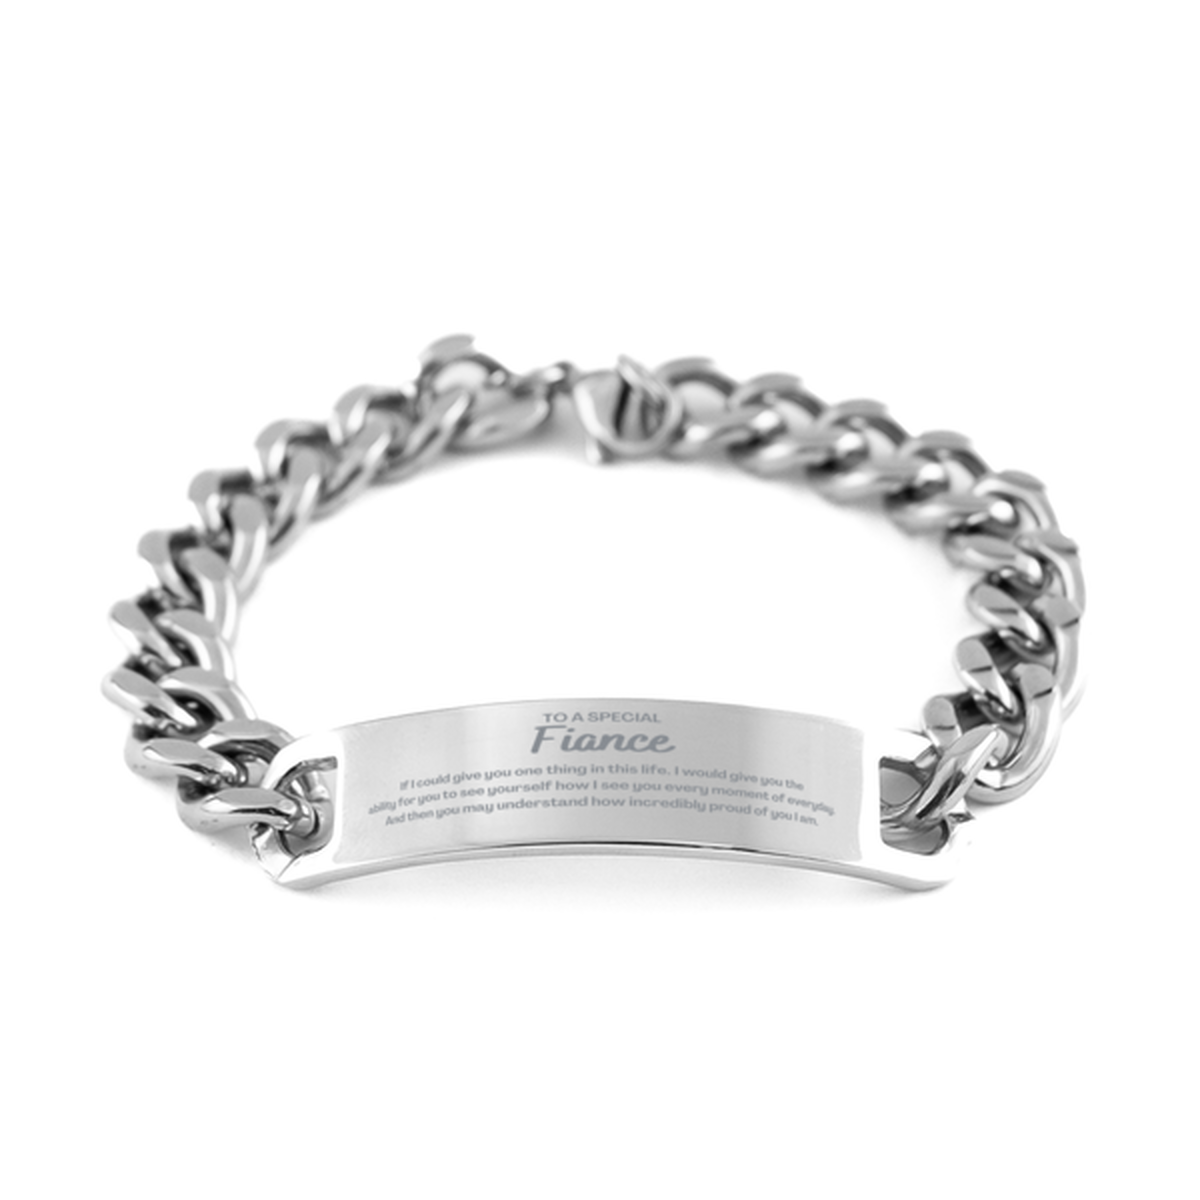 To My Fiance Cuban Chain Stainless Steel Bracelet, Gifts For Fiance Engraved, Inspirational Gifts for Christmas Birthday, Epic Gifts for Fiance To A Special Fiance how incredibly proud of you I am